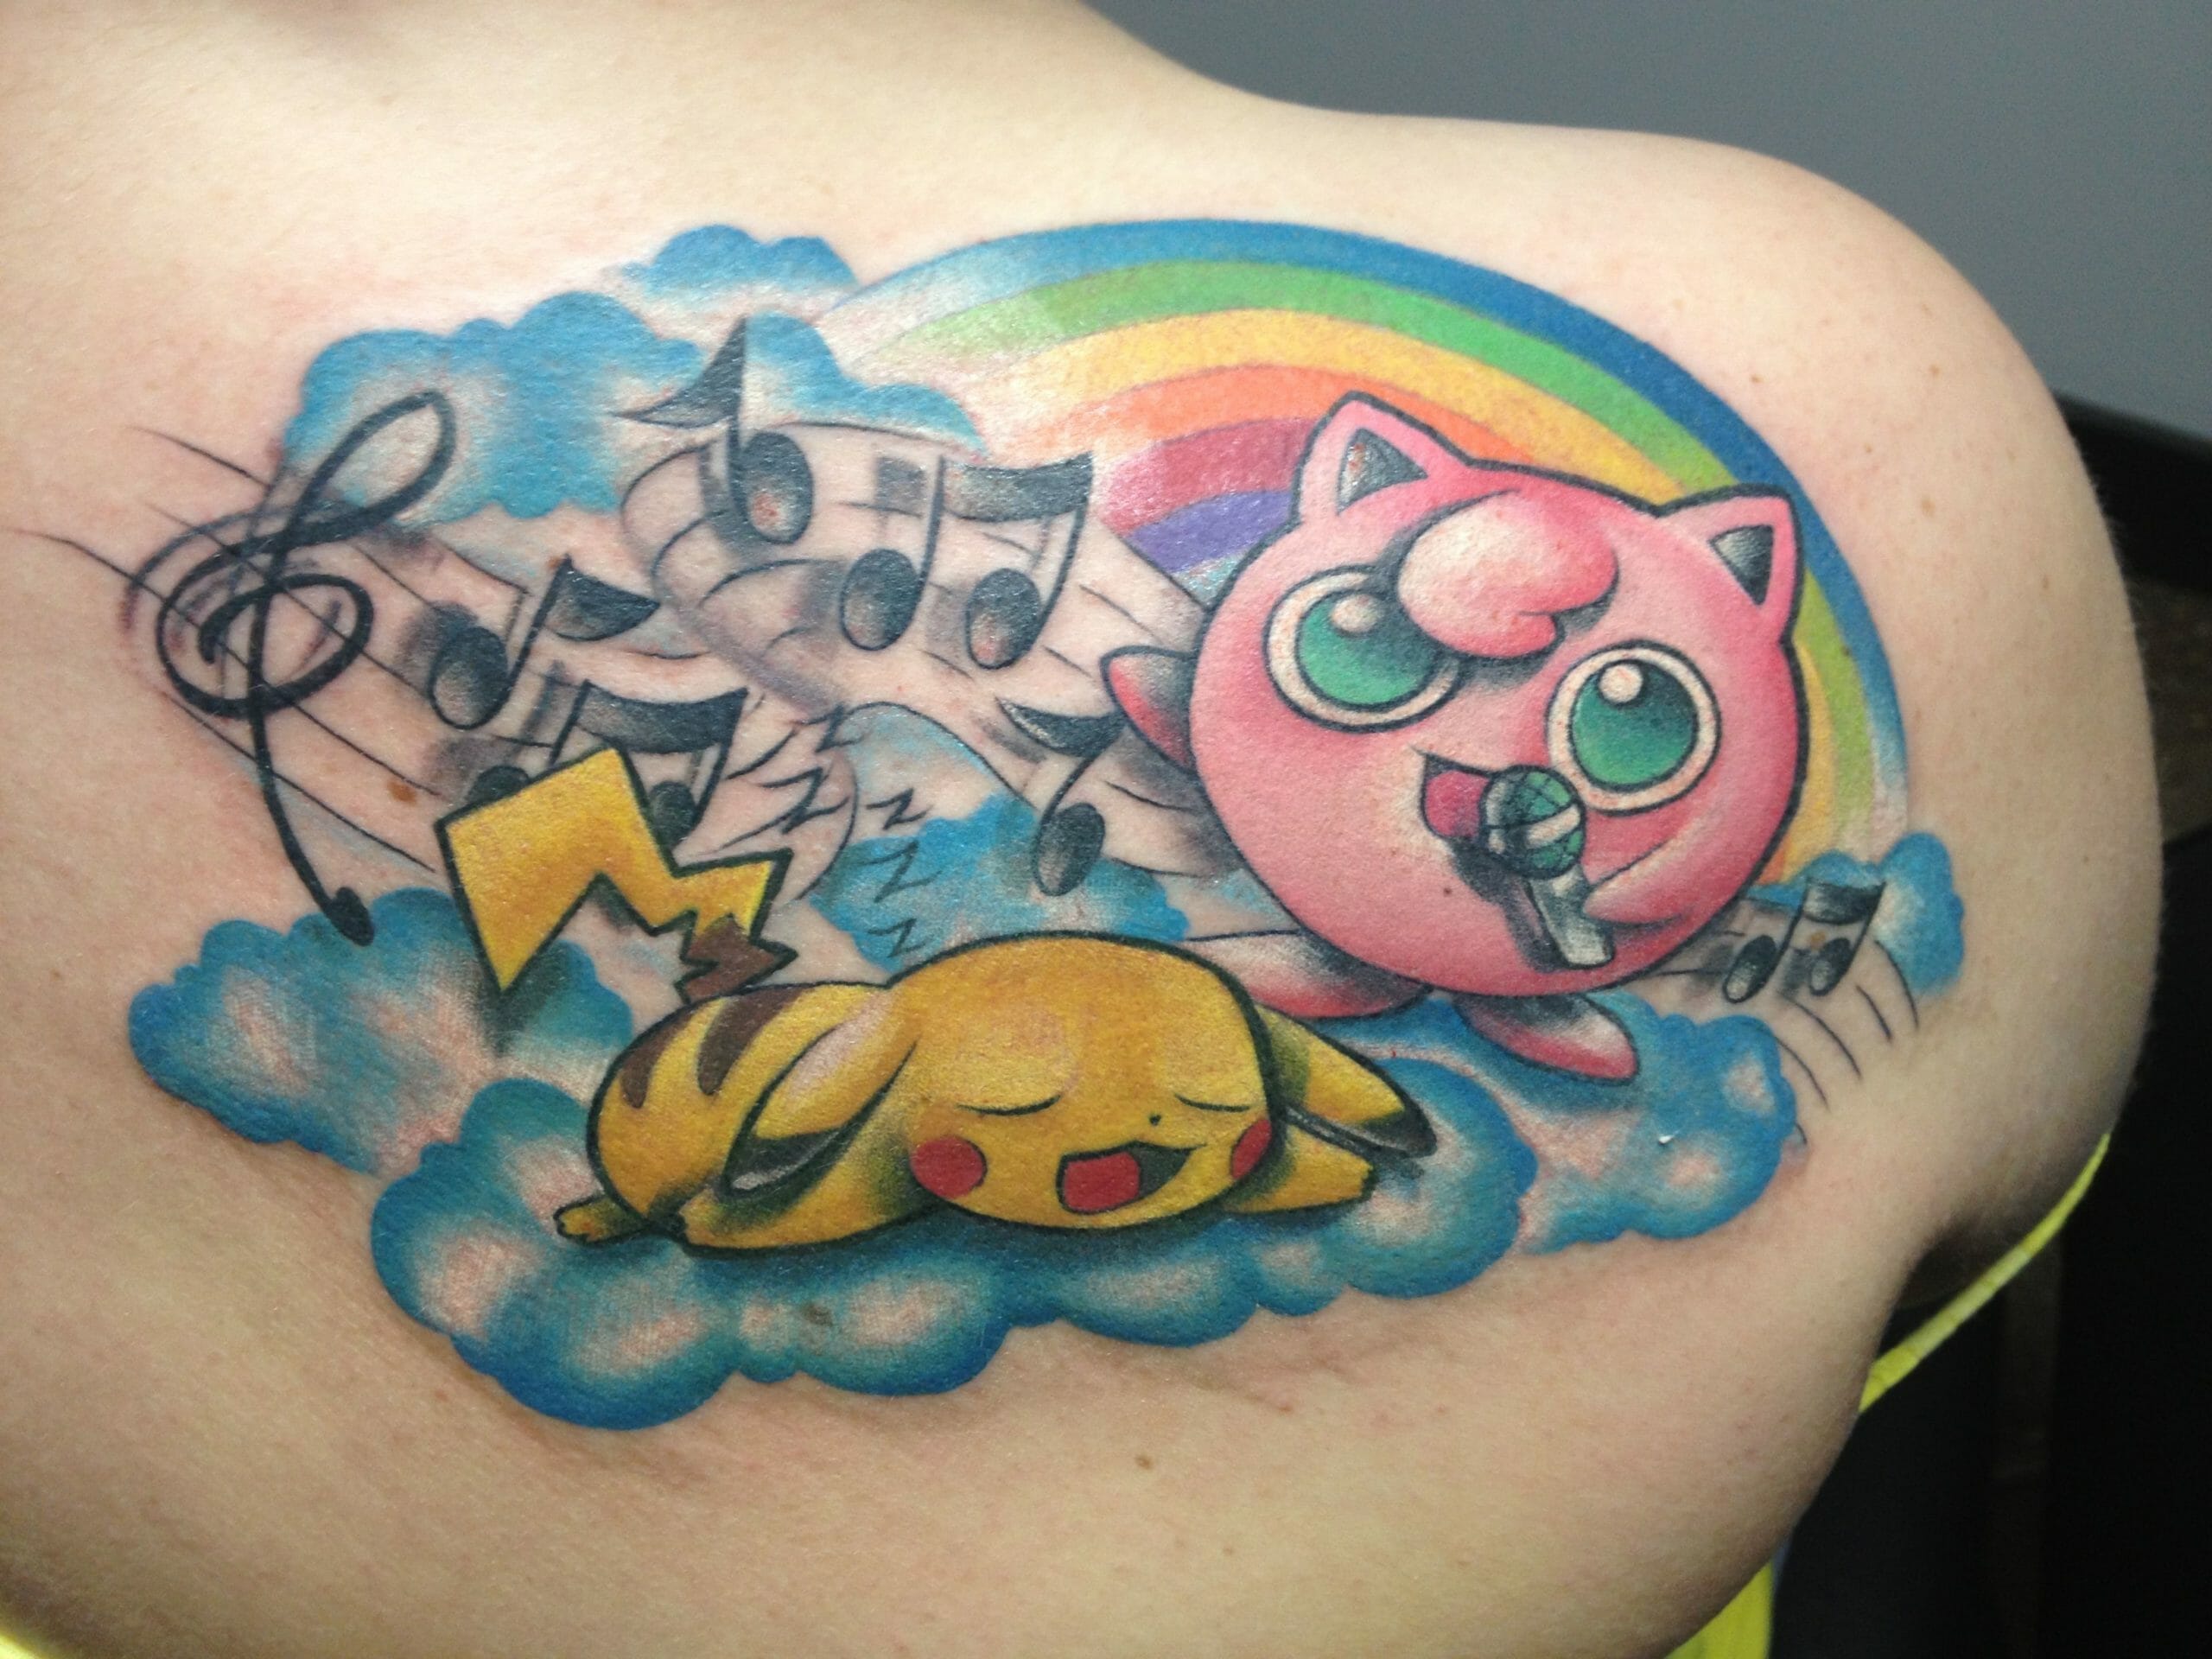 Ugliest Tattoos - pikachu - Bad tattoos of horrible fail situations that  are permanent and on your body. - funny tattoos | bad tattoos | horrible  tattoos | tattoo fail - Cheezburger